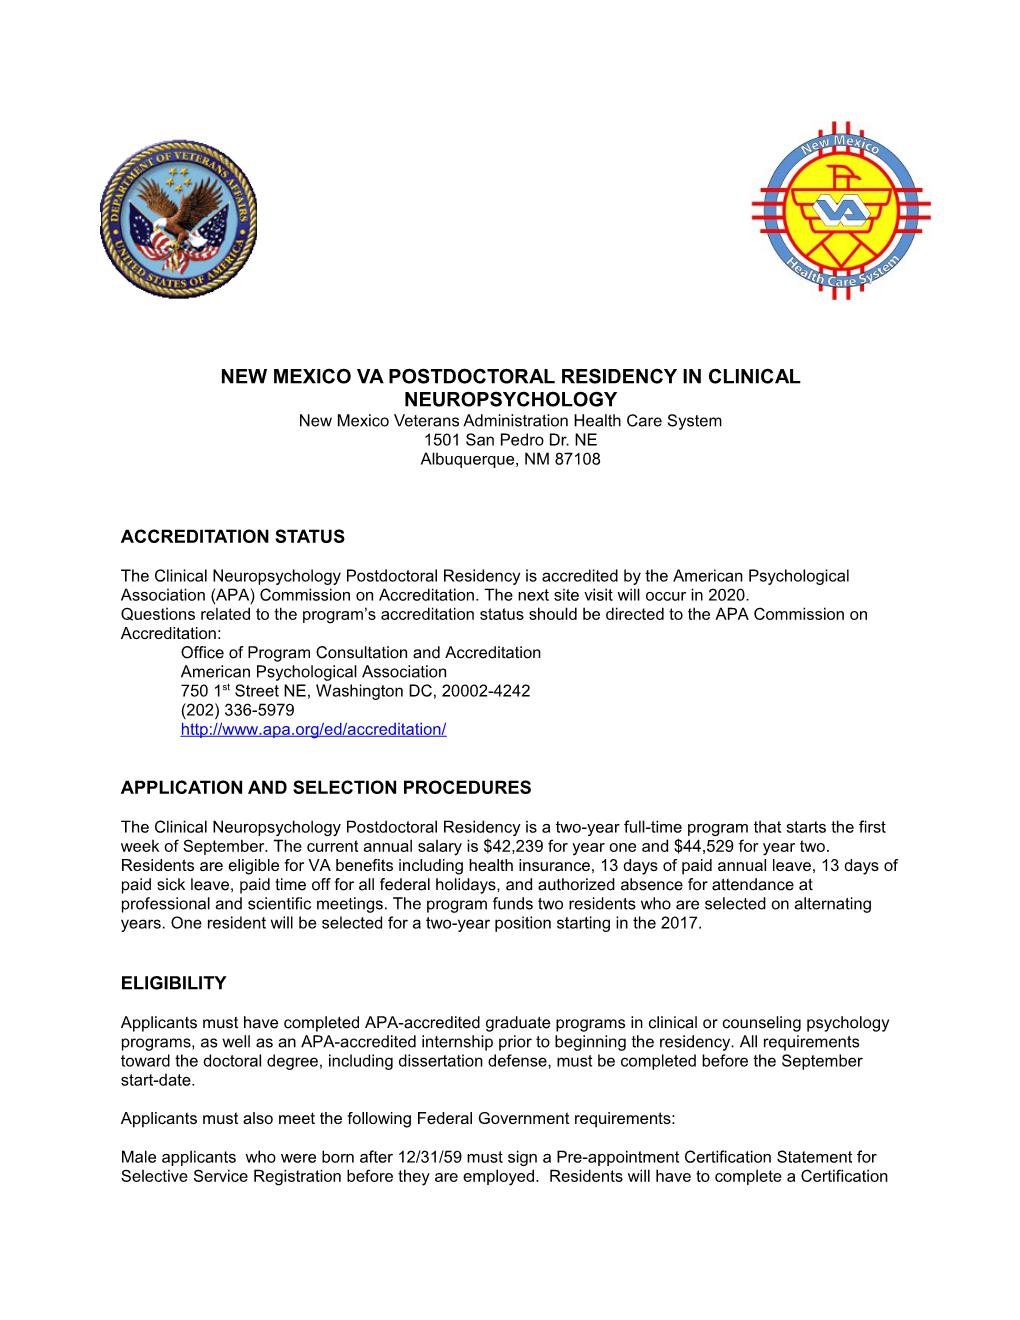 New Mexico VA Postdoctoral Residency in Clinical Neuropsychology